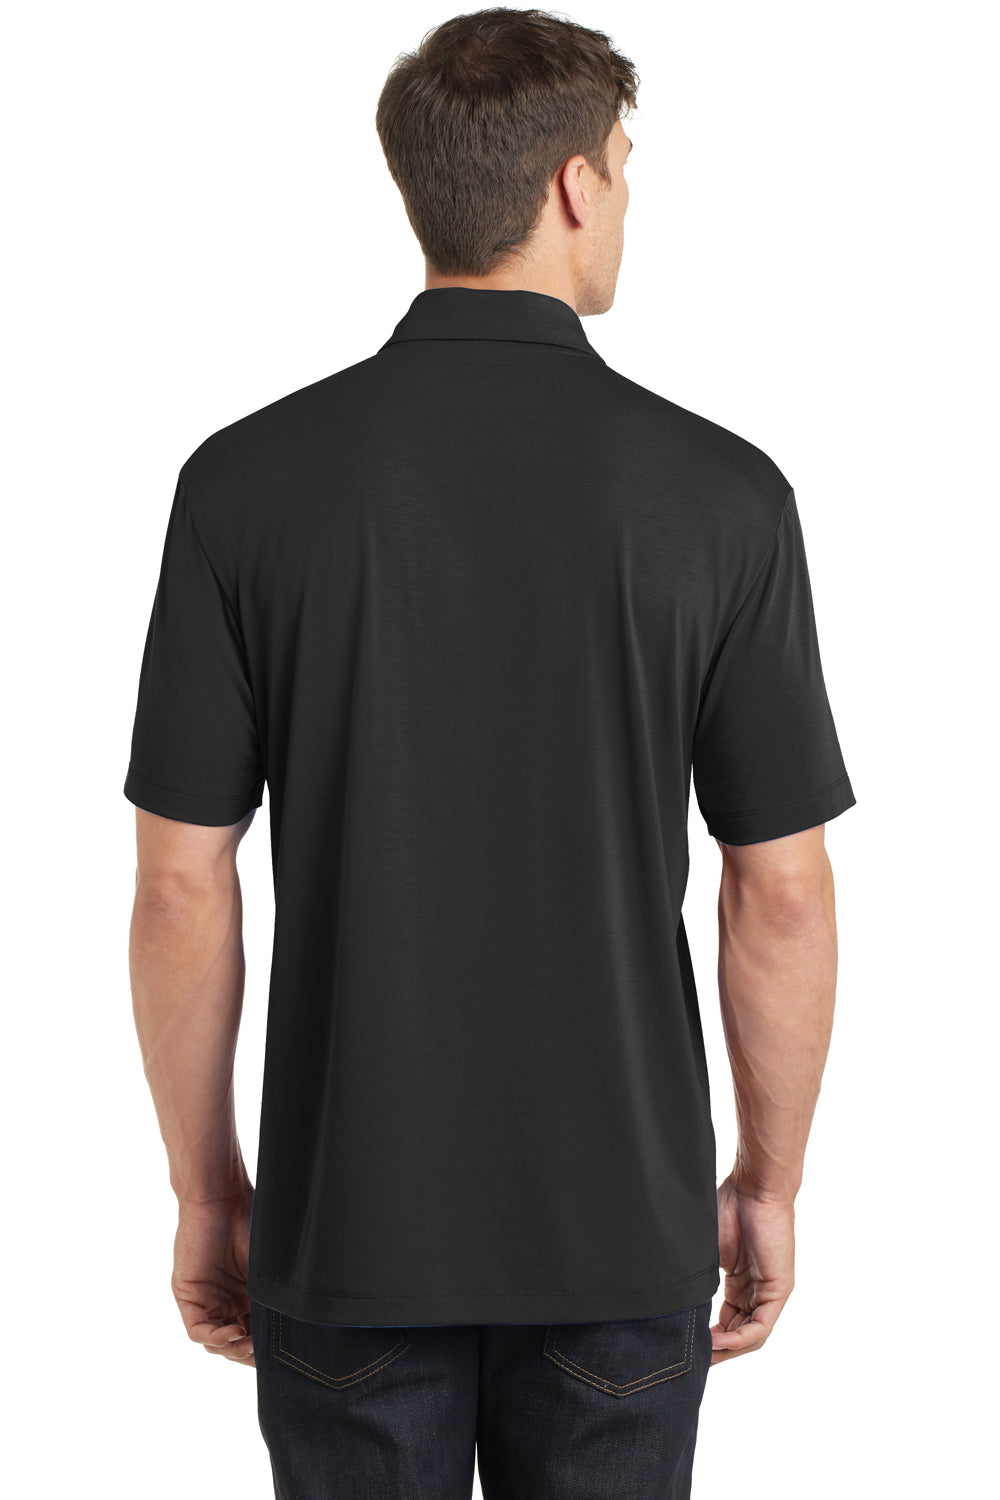 Port Authority K568 Mens Cotton Touch Performance Moisture Wicking Short Sleeve Polo Shirt Black Back